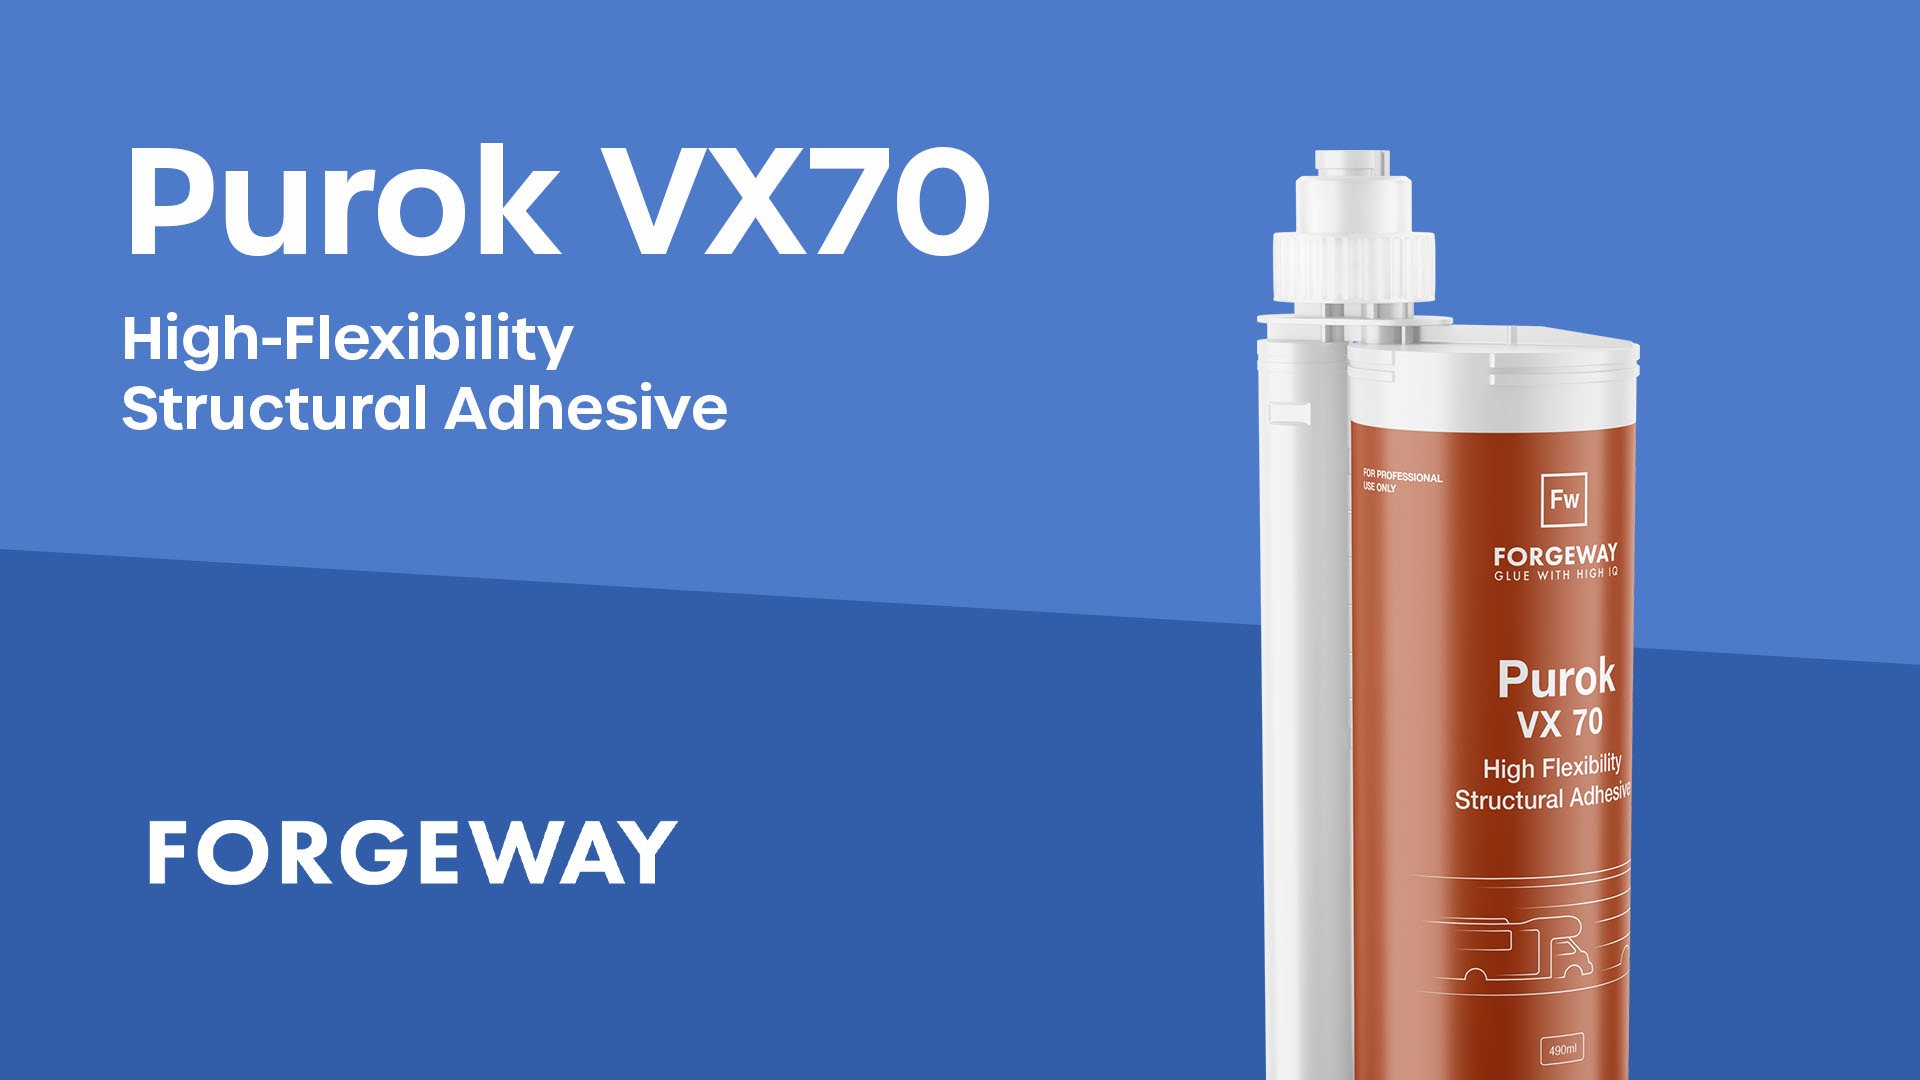 Product Review of Purok VX70, the flexible structural acrylic adhesive